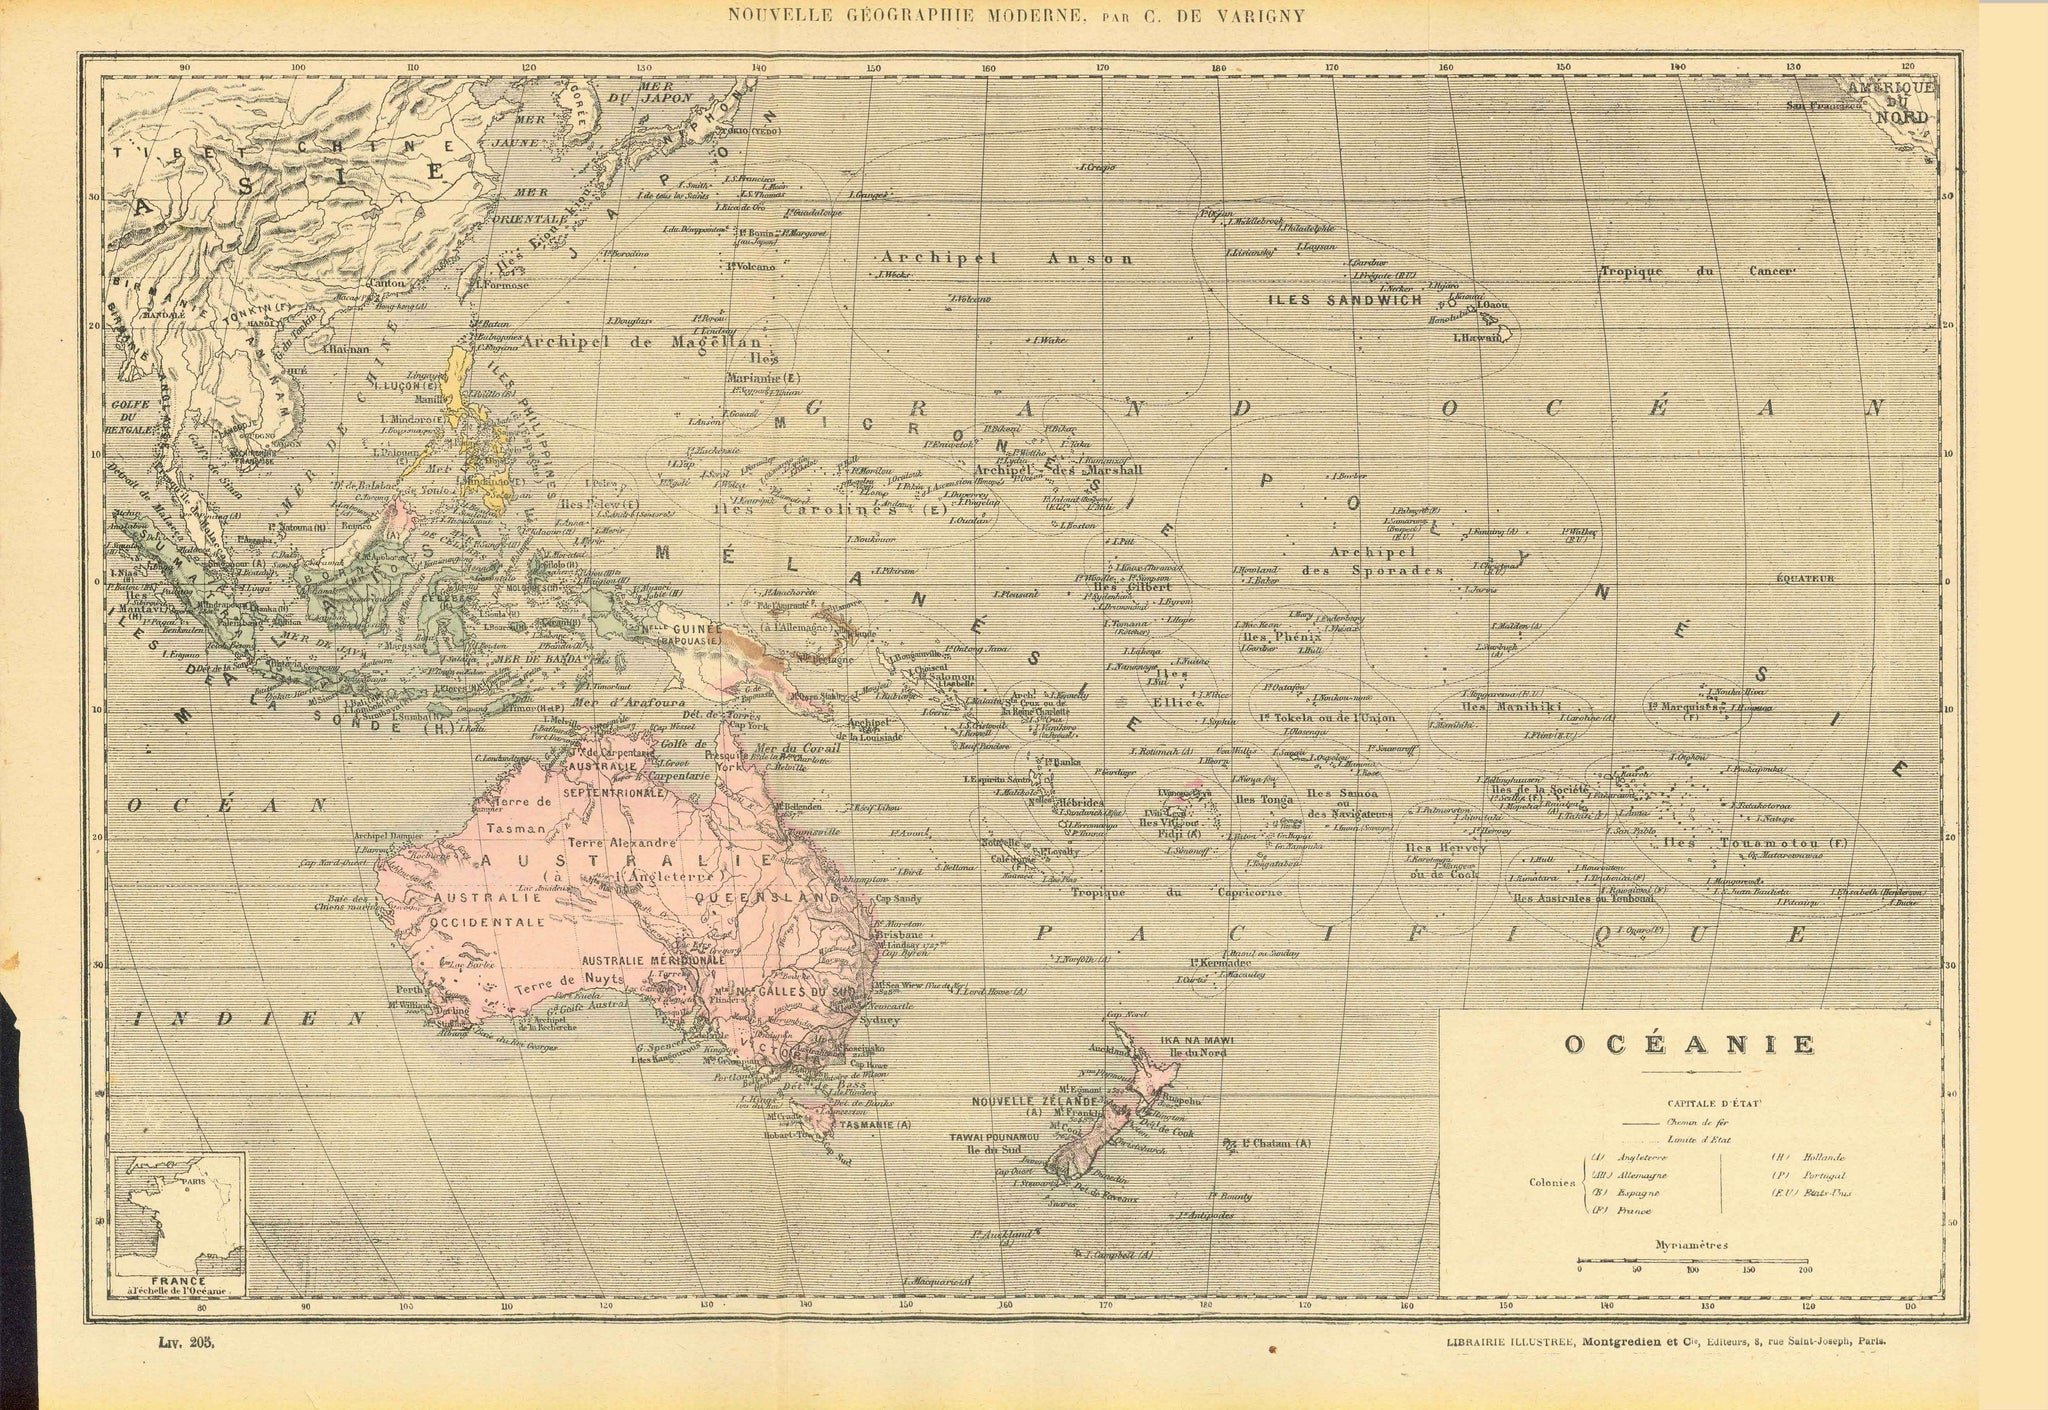 "Oceanie"  Very detailed map of the South Pacific with Australia, New Zealand, the Philippines, the Sandwich Islands (Hawaii) and southeastern Chuna. In the upper right corner is a small area of North Africa. In the lower left is a size comparison of the area with France.  This map was published ca 1890.  For a 30% discount enter MAPS30 at chekout   Original antique print  